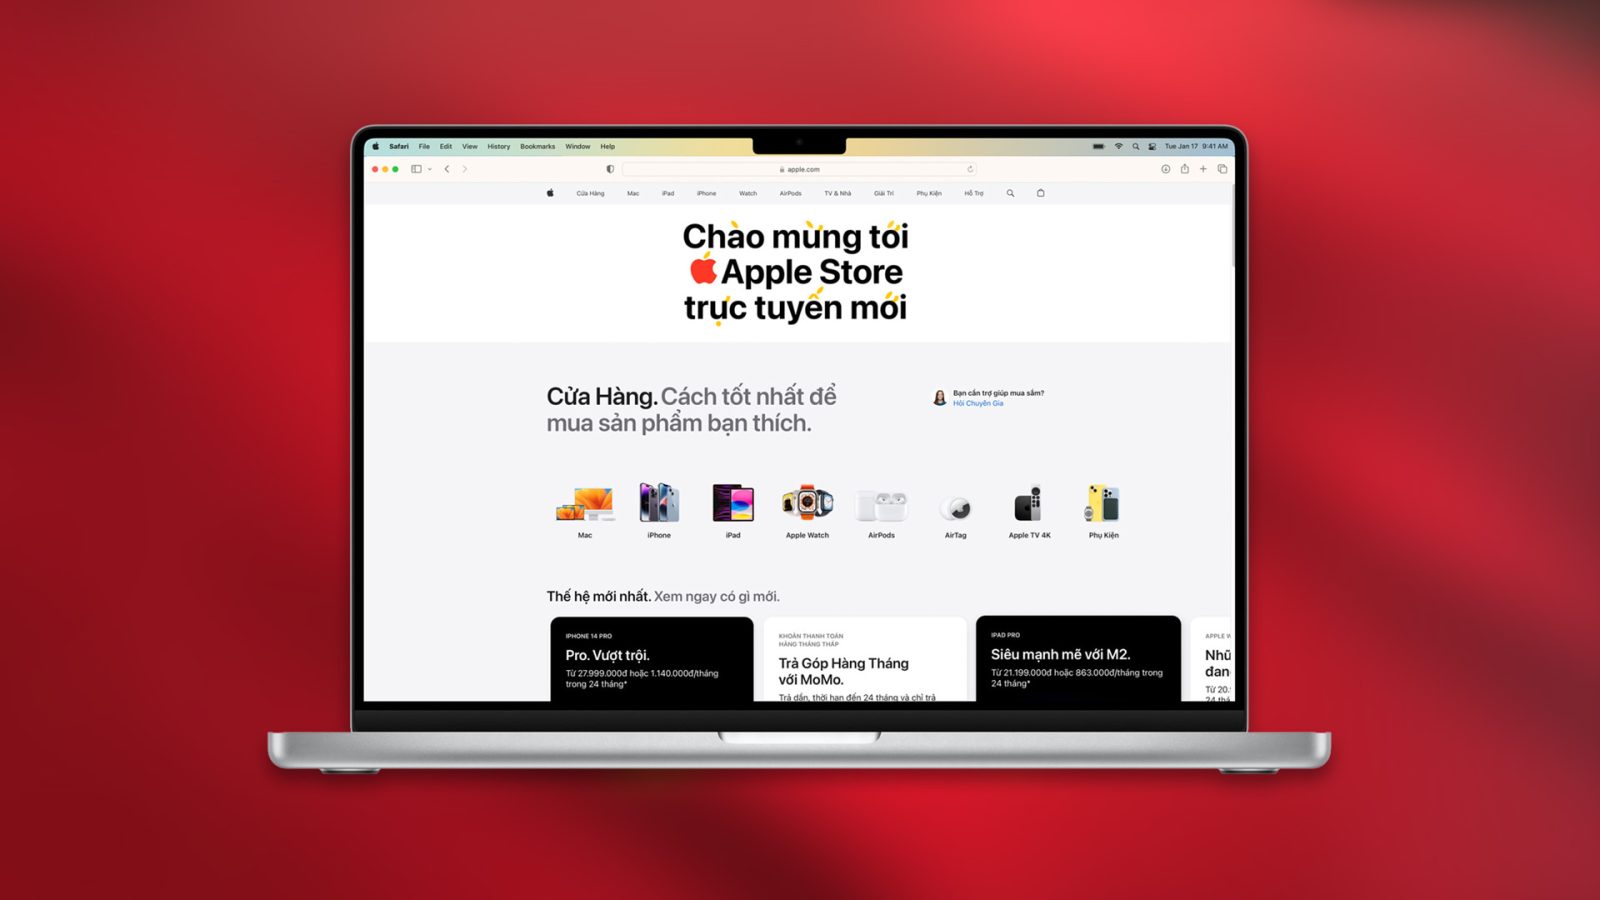 Apple launches its online store in Vietnam with customized products and Apple Watch Studio